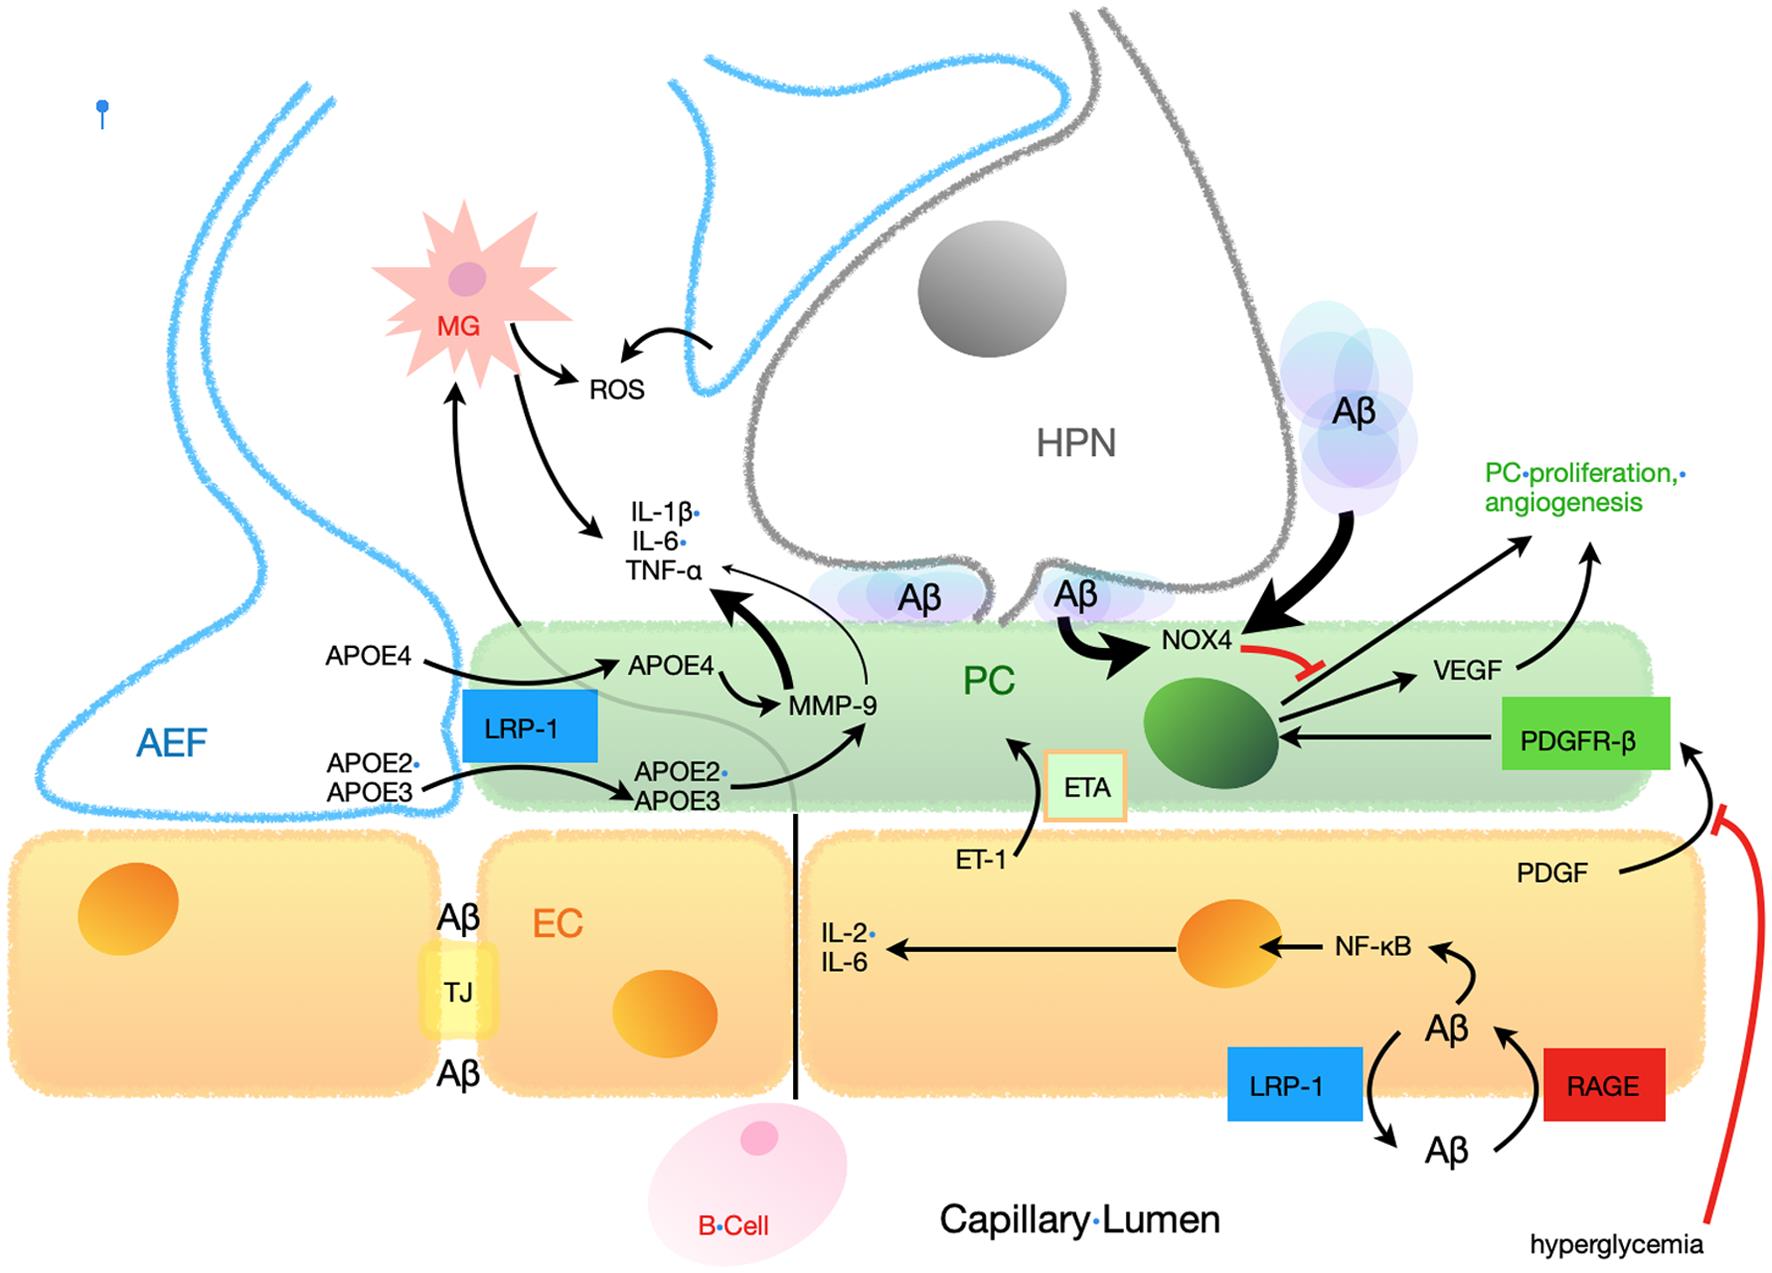 Idealized longitudinal cross section of the neurovascular unit summarizing molecular mechanisms of pericyte regulation and their relationships with AD pathophysiology.